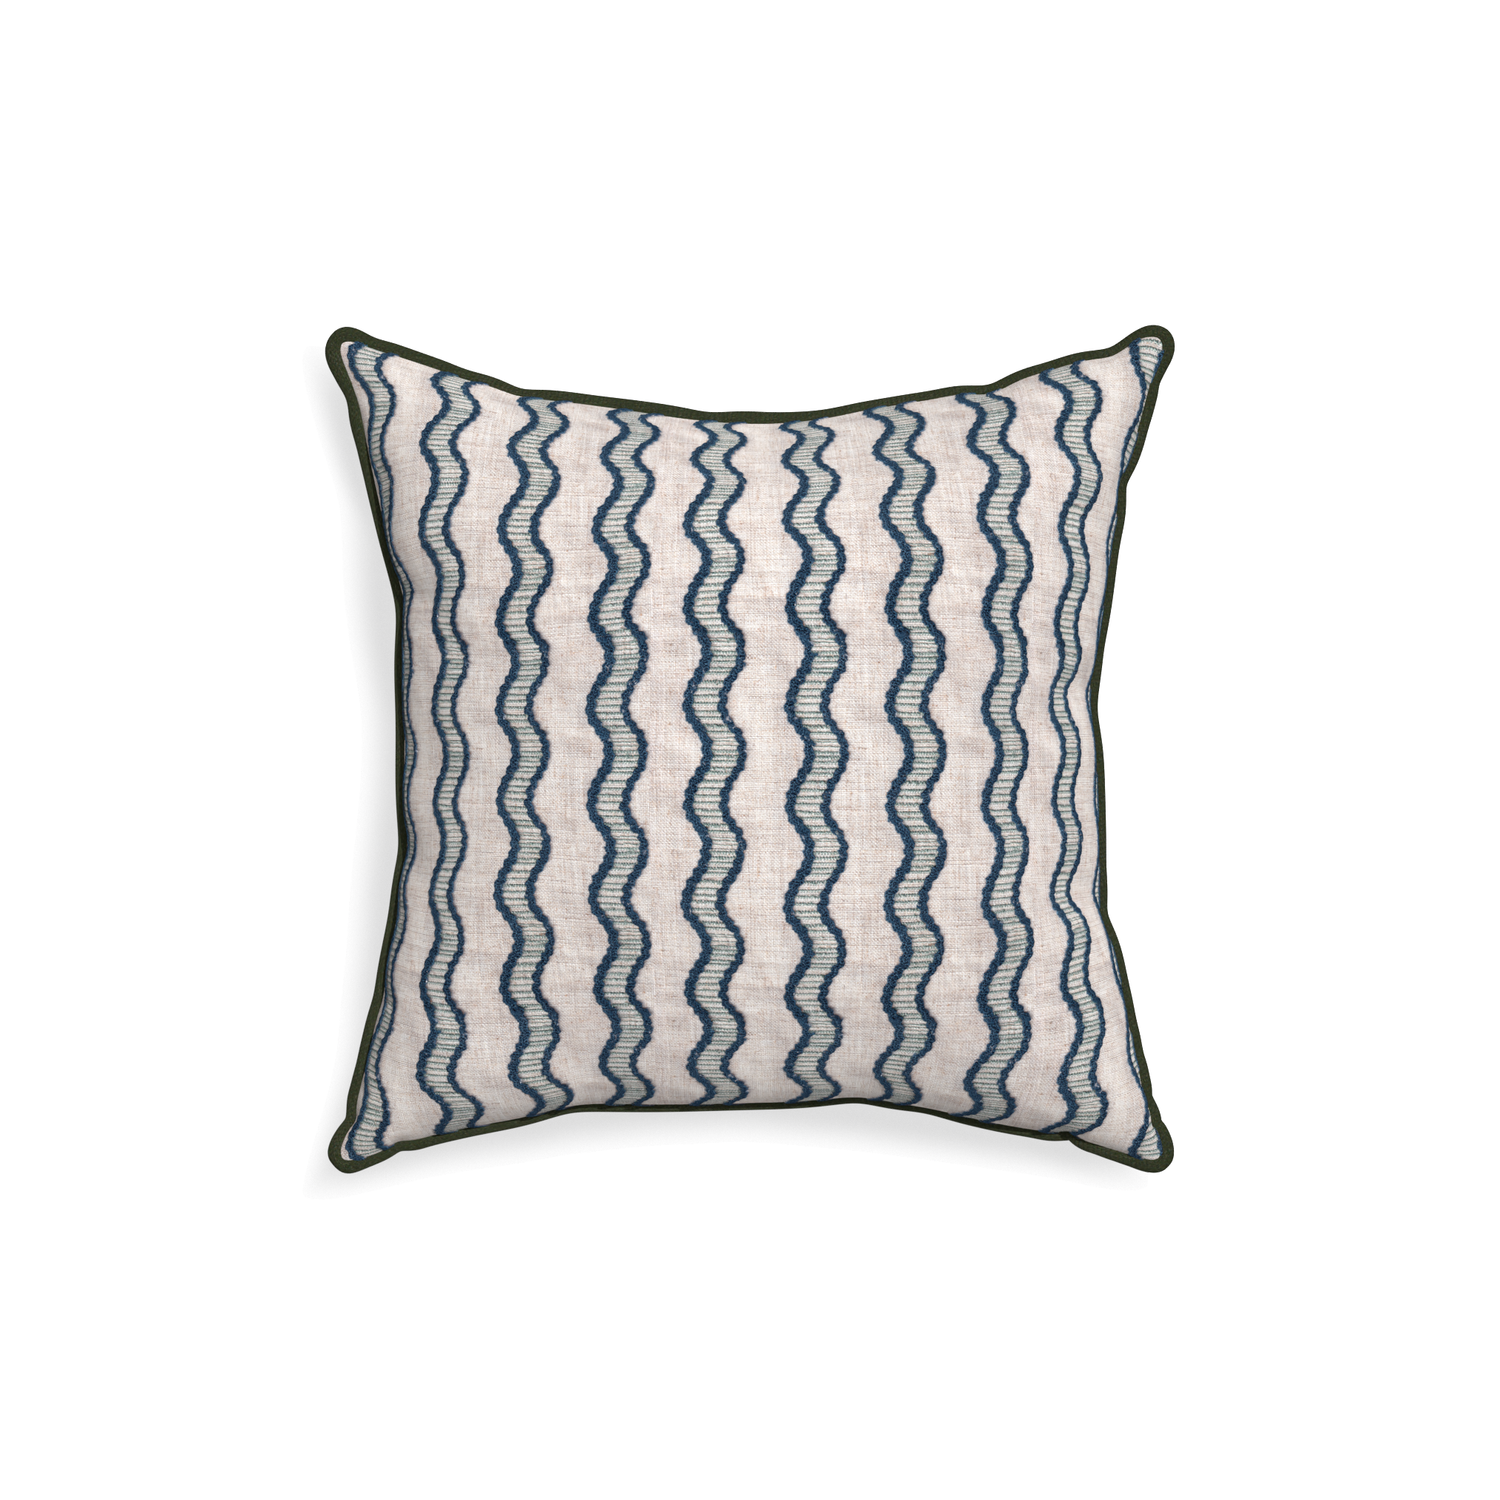 18-square beatrice custom embroidered wavepillow with f piping on white background